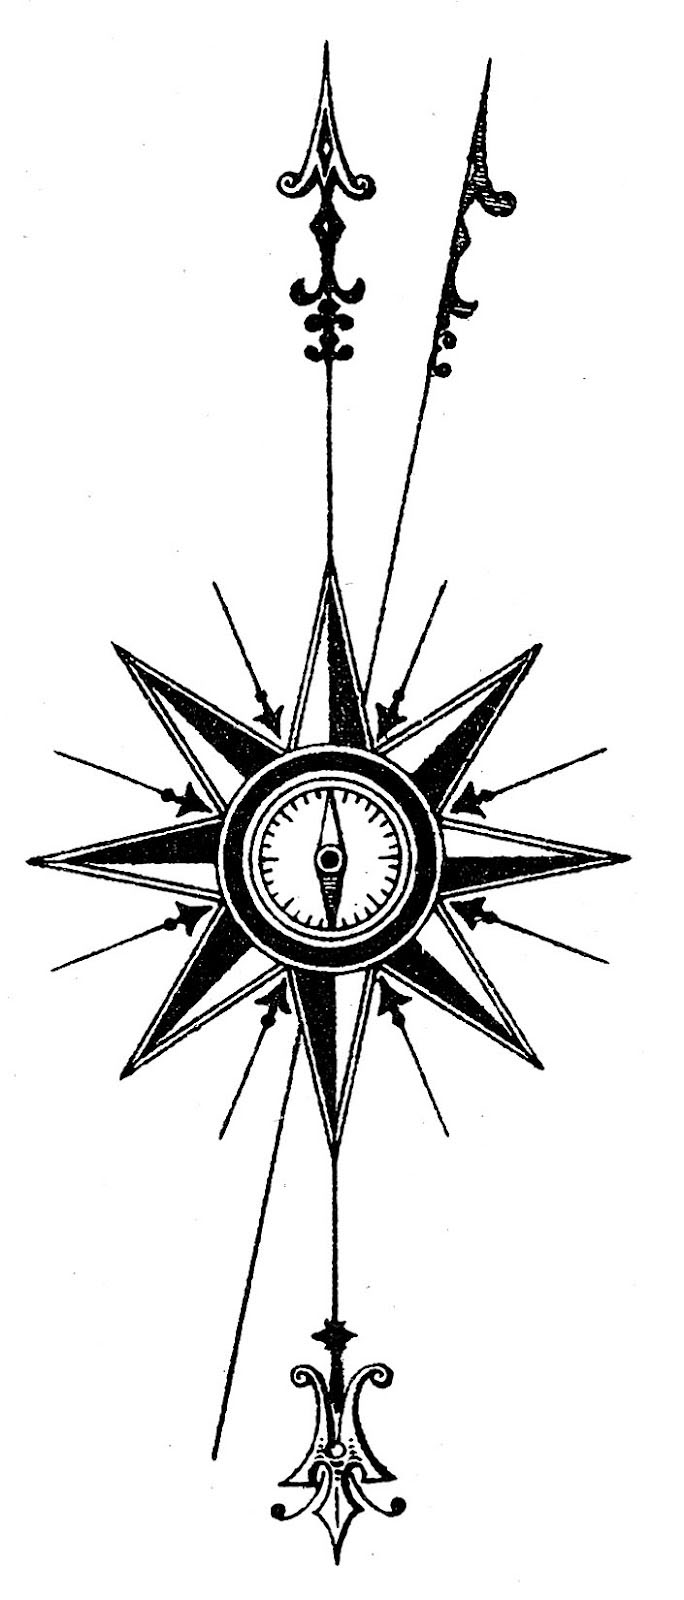 Vintage Compass Rose Image! Graphics Fairy